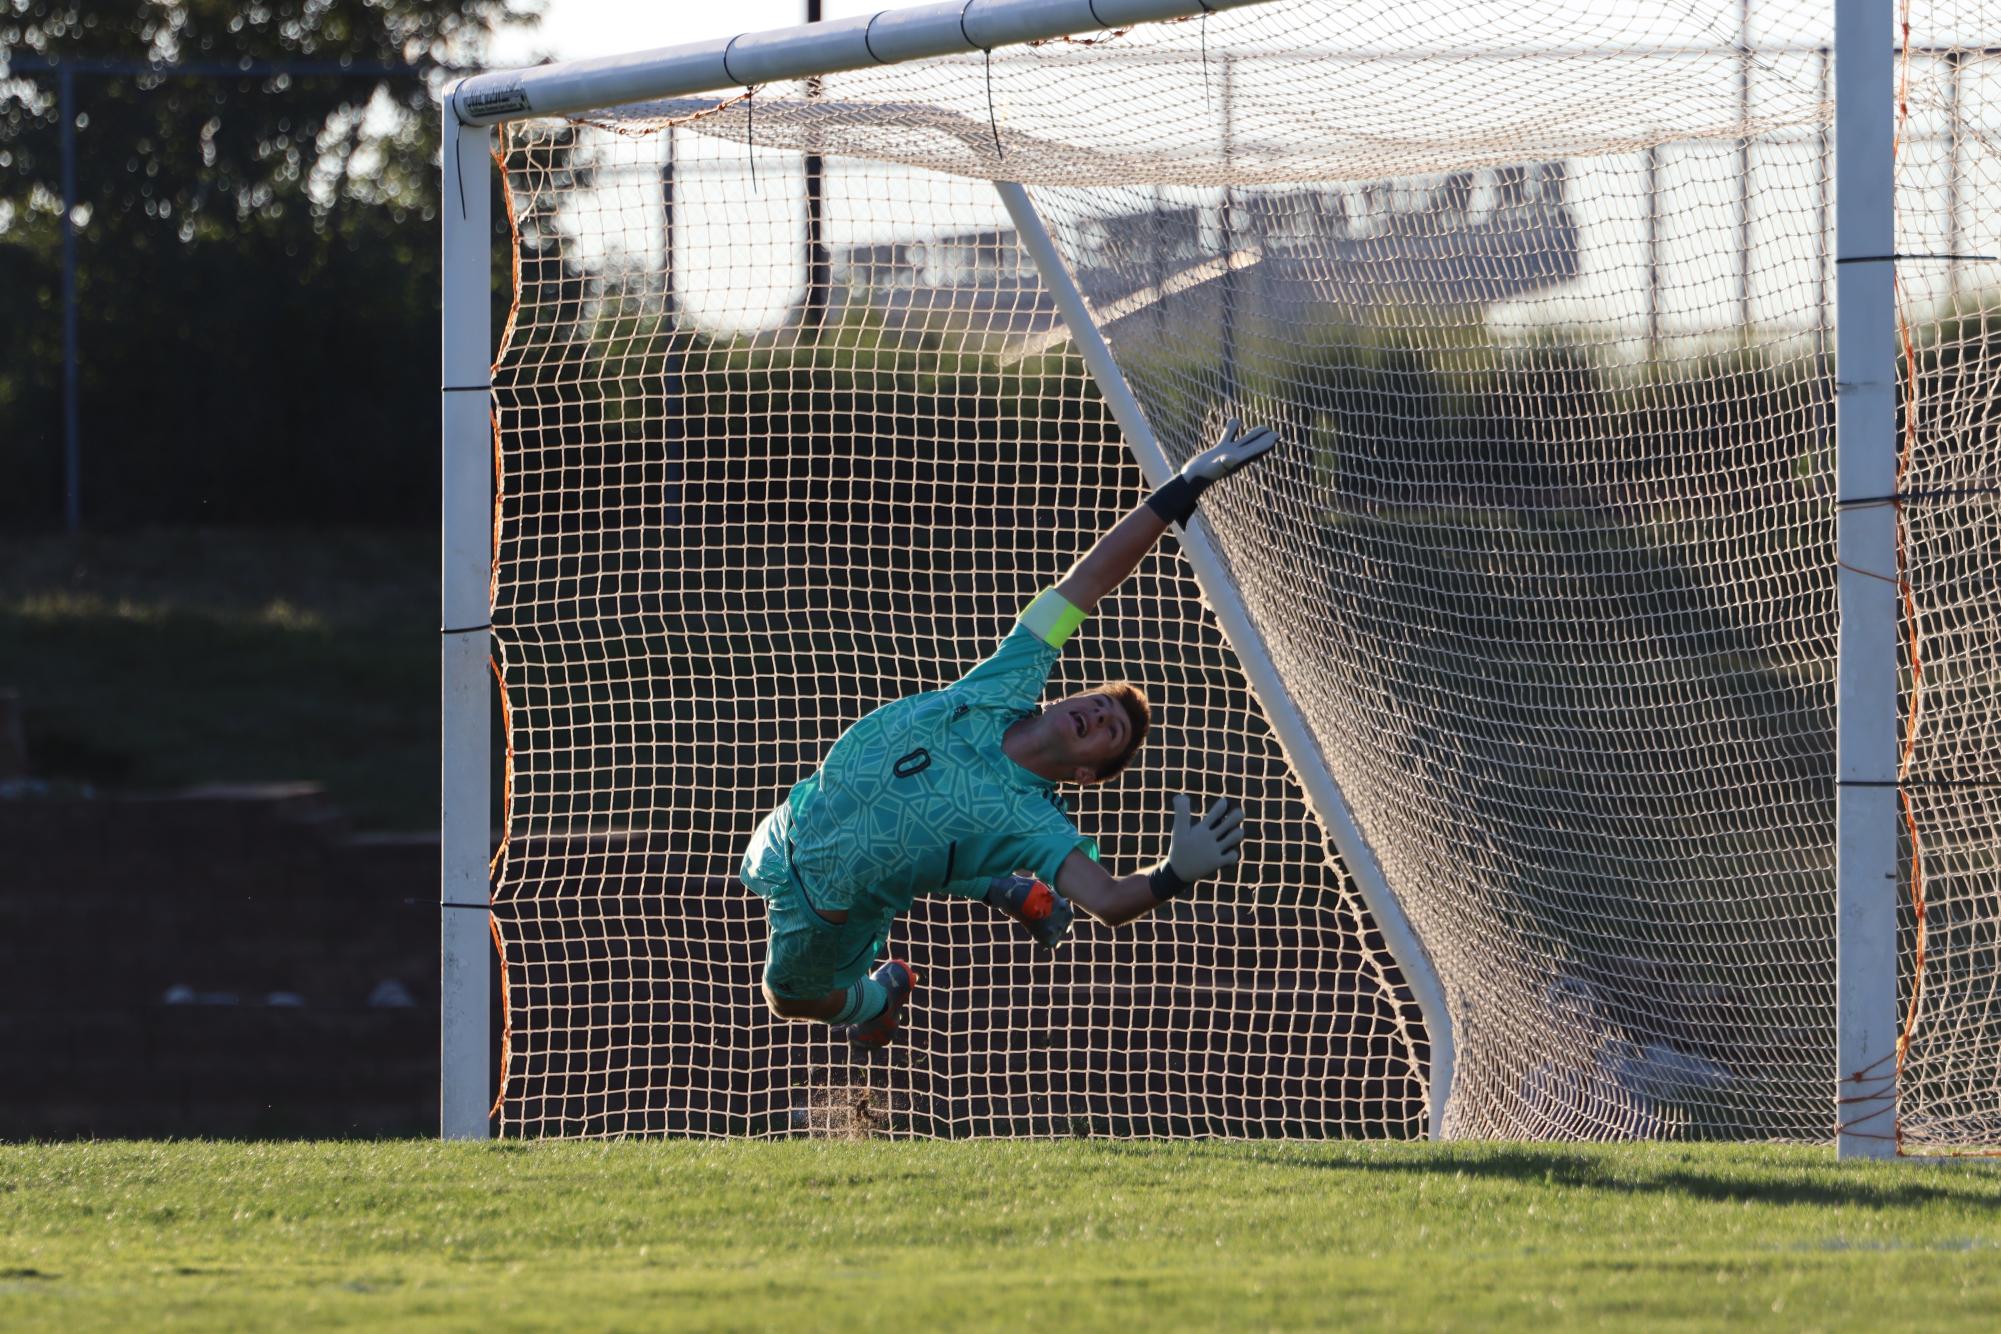 Goalkeeping Senior Carson Flake jumps in attempt to stop a PK in penalty shootout preceding BVWs win.